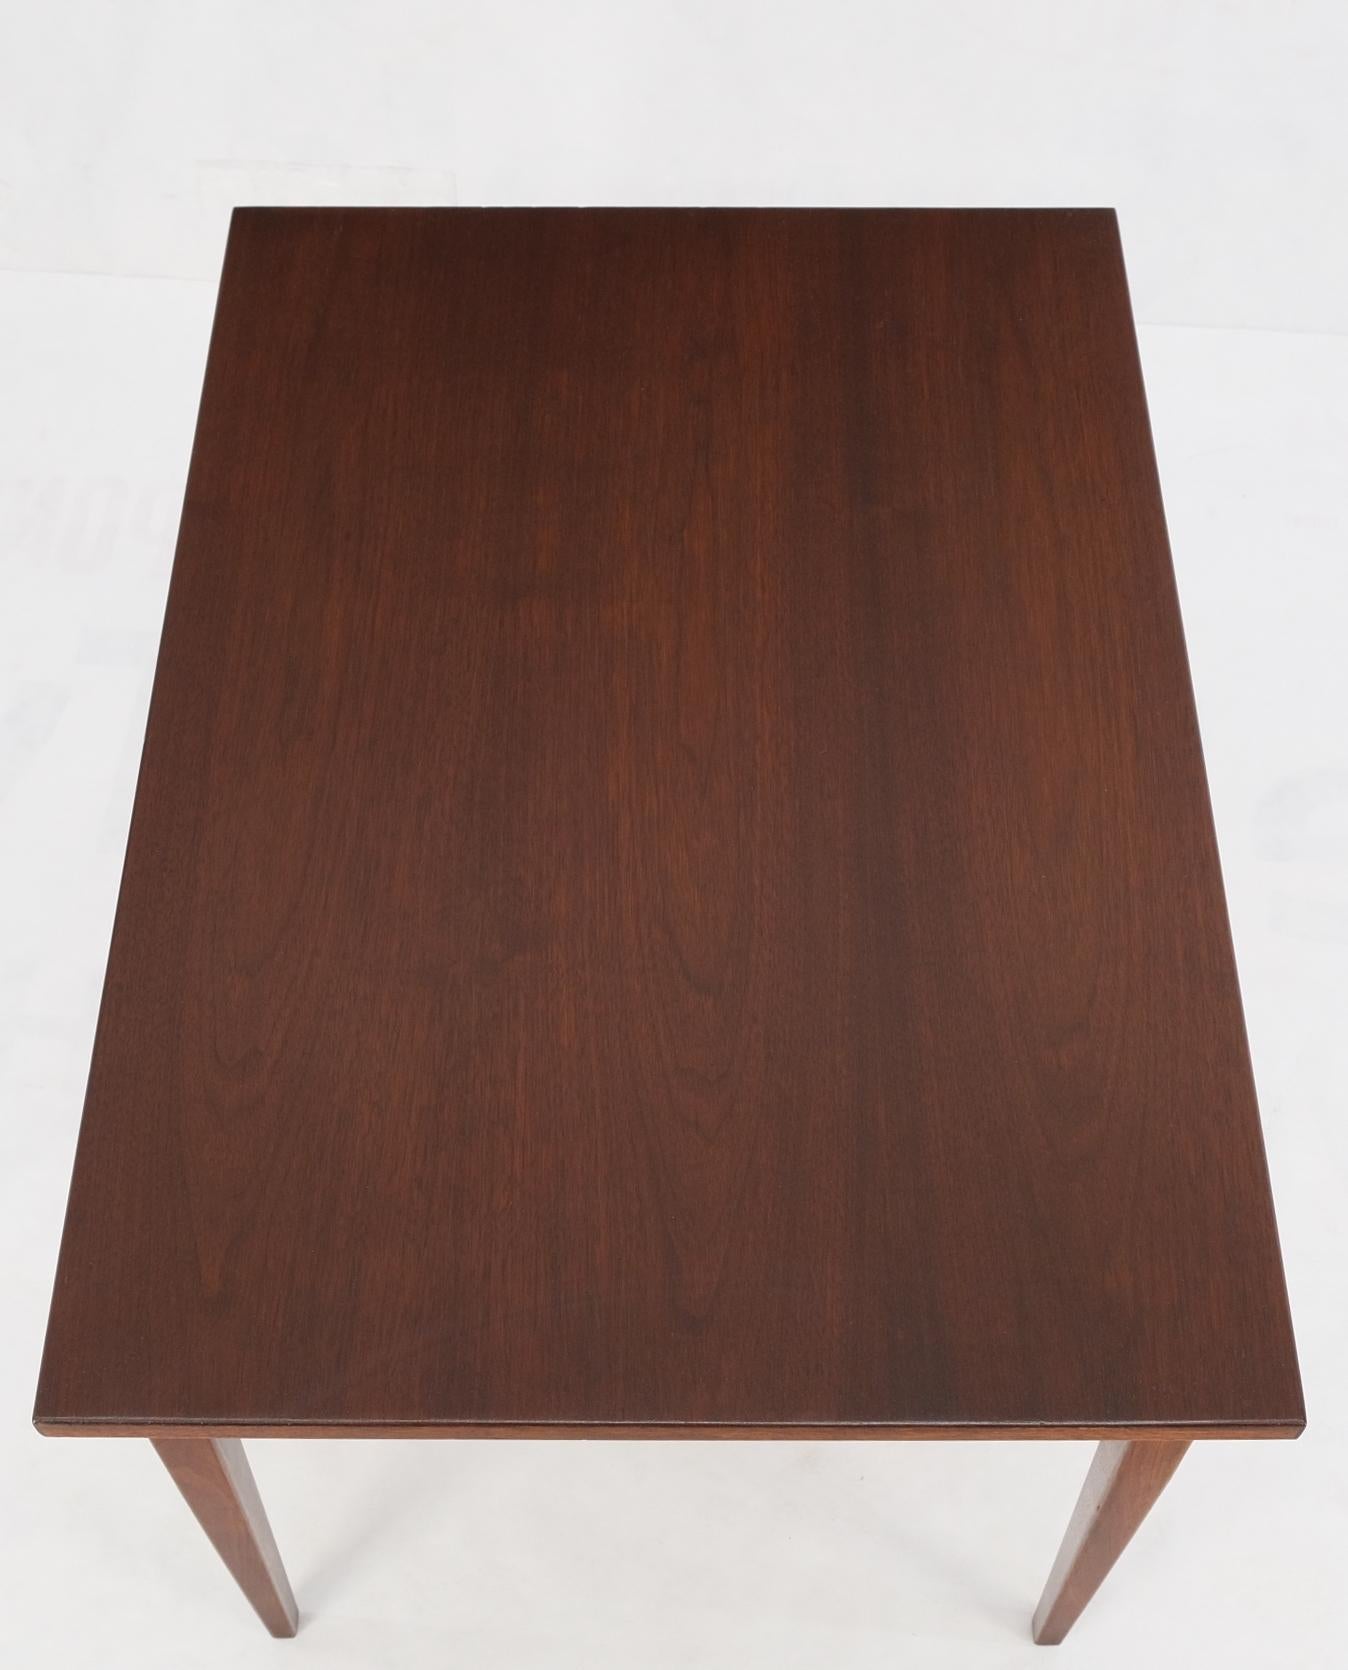 Knoll Risom One Drawer Oiled Walnut Tapered Legs End Side Table Stand Decor Mint For Sale 4